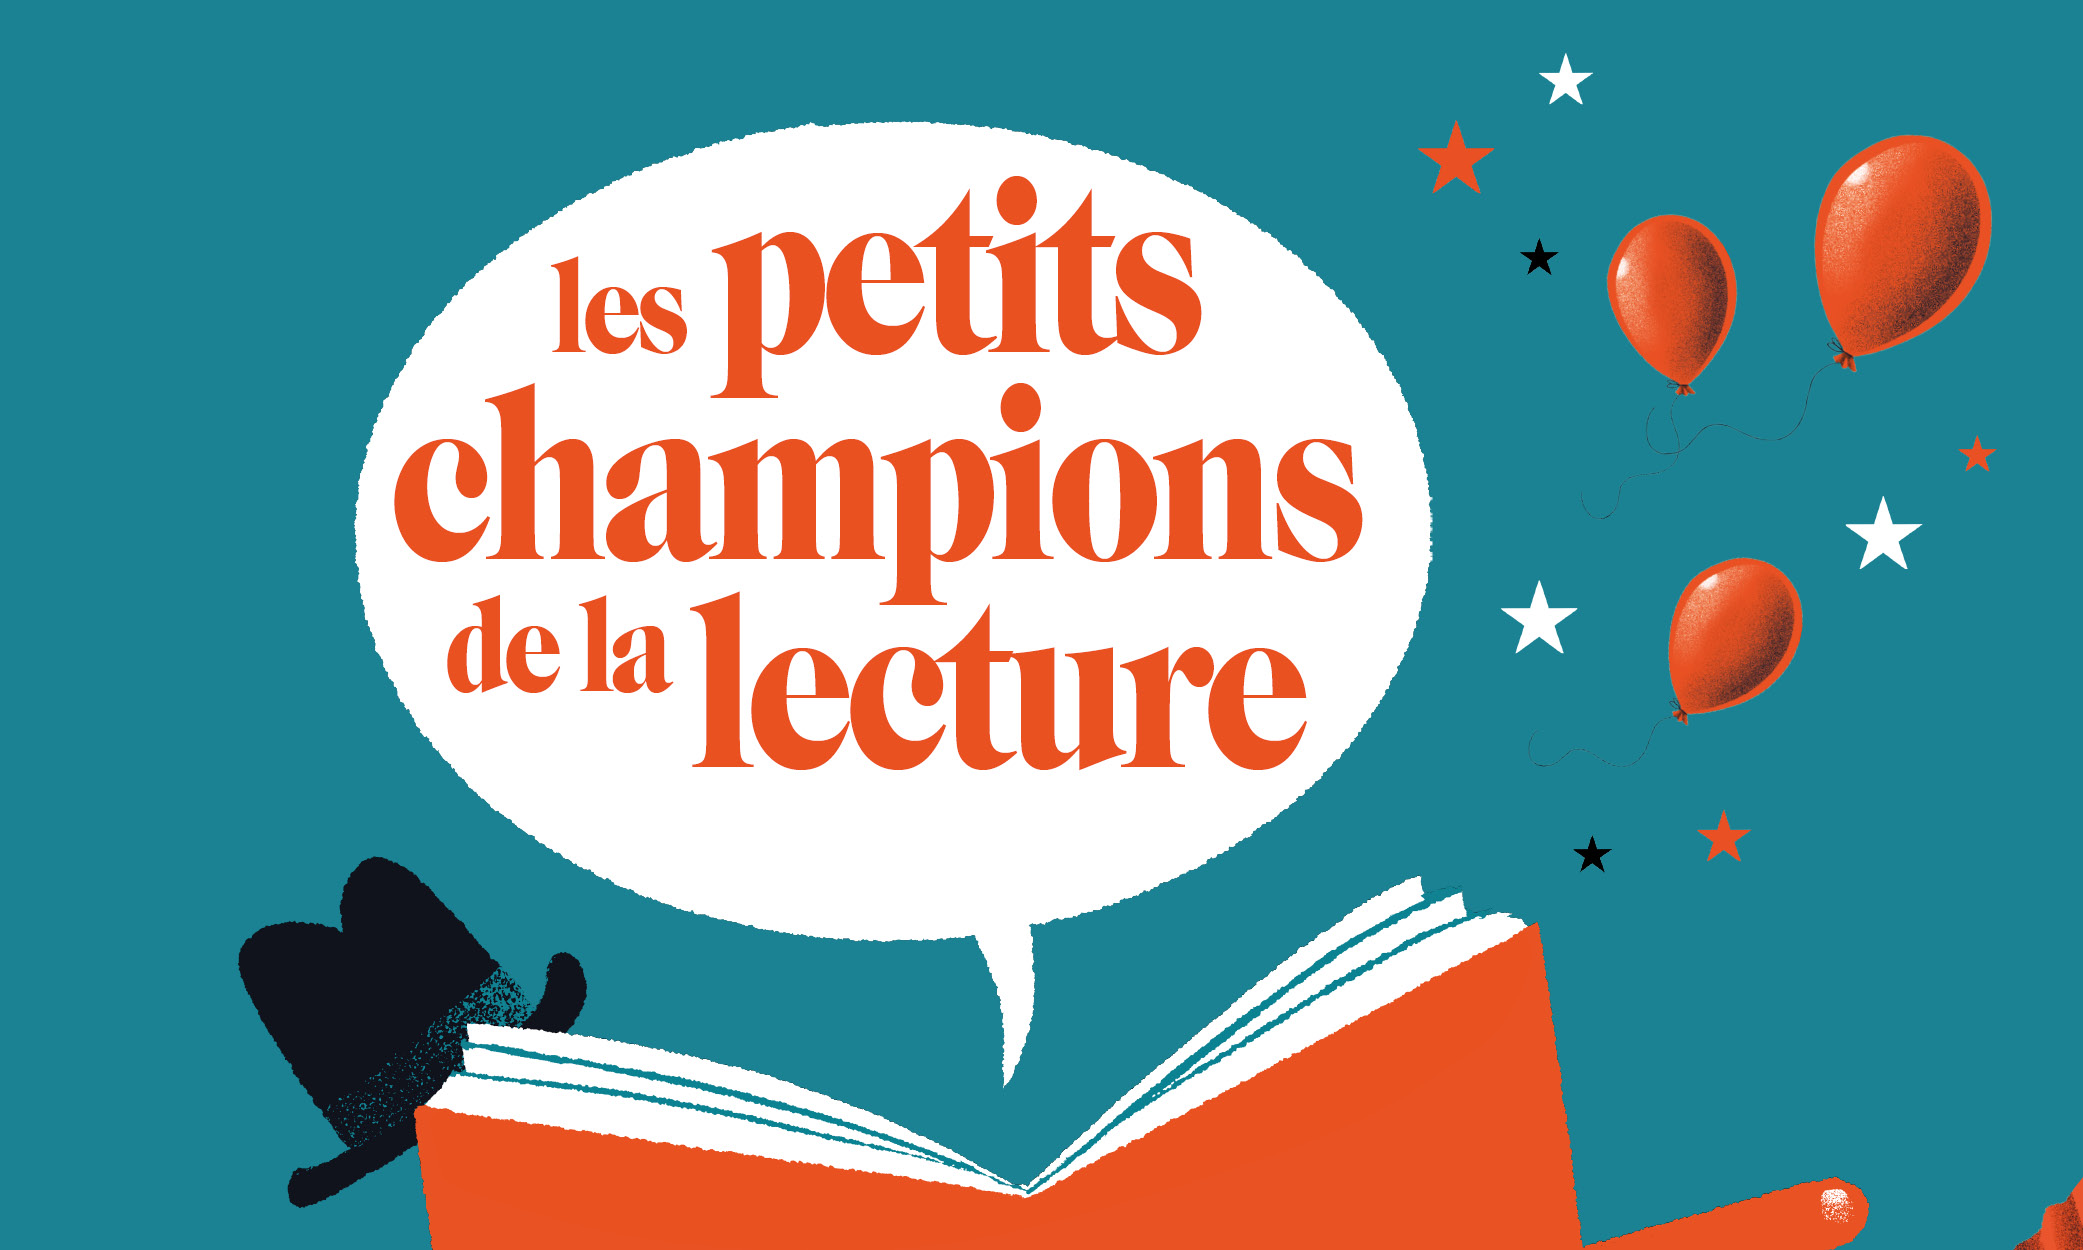 petis_champions_lecture_700x394.jpg